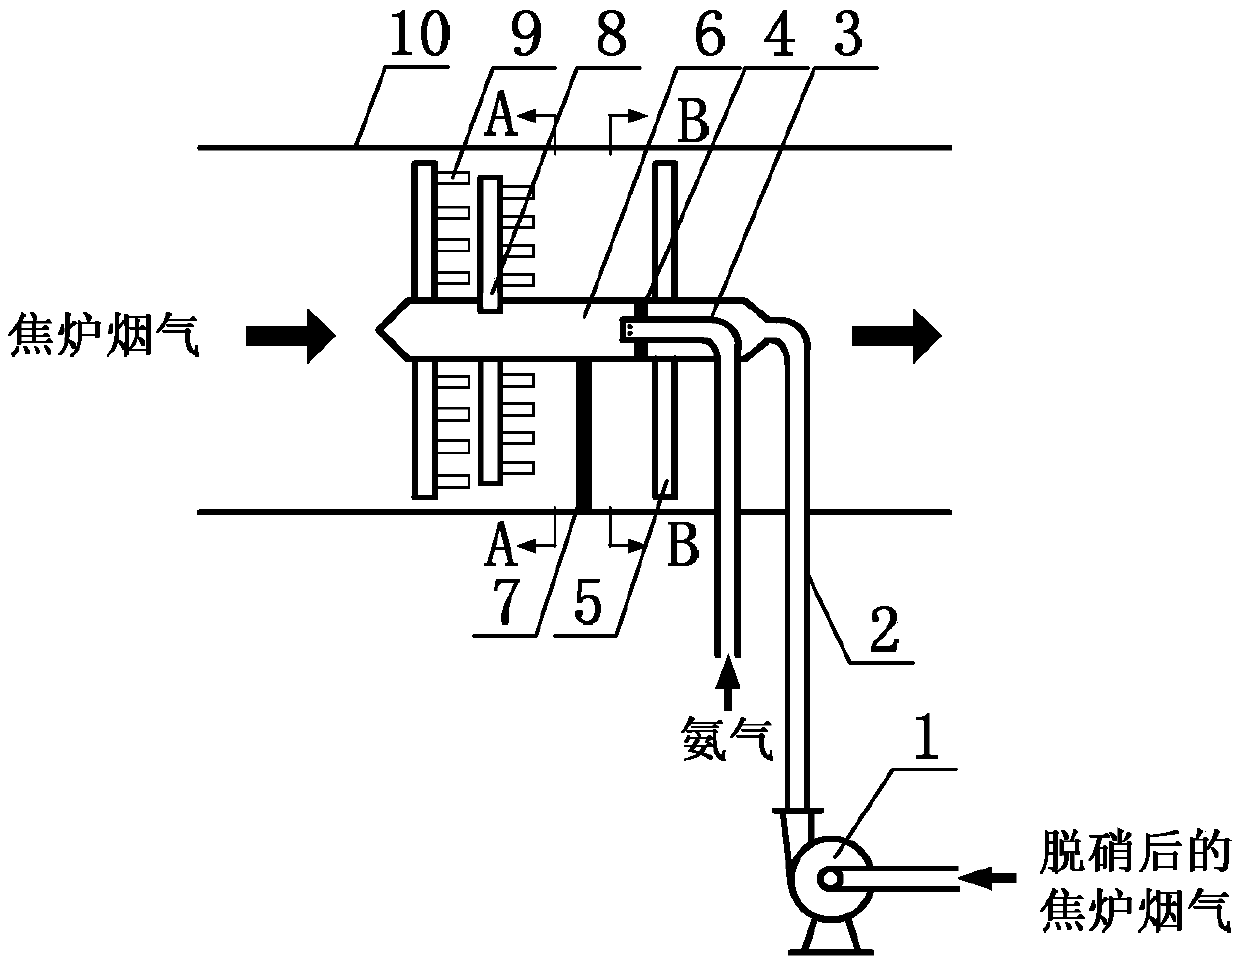 A petal-shaped ammonia injection device for coke oven flue gas denitrification